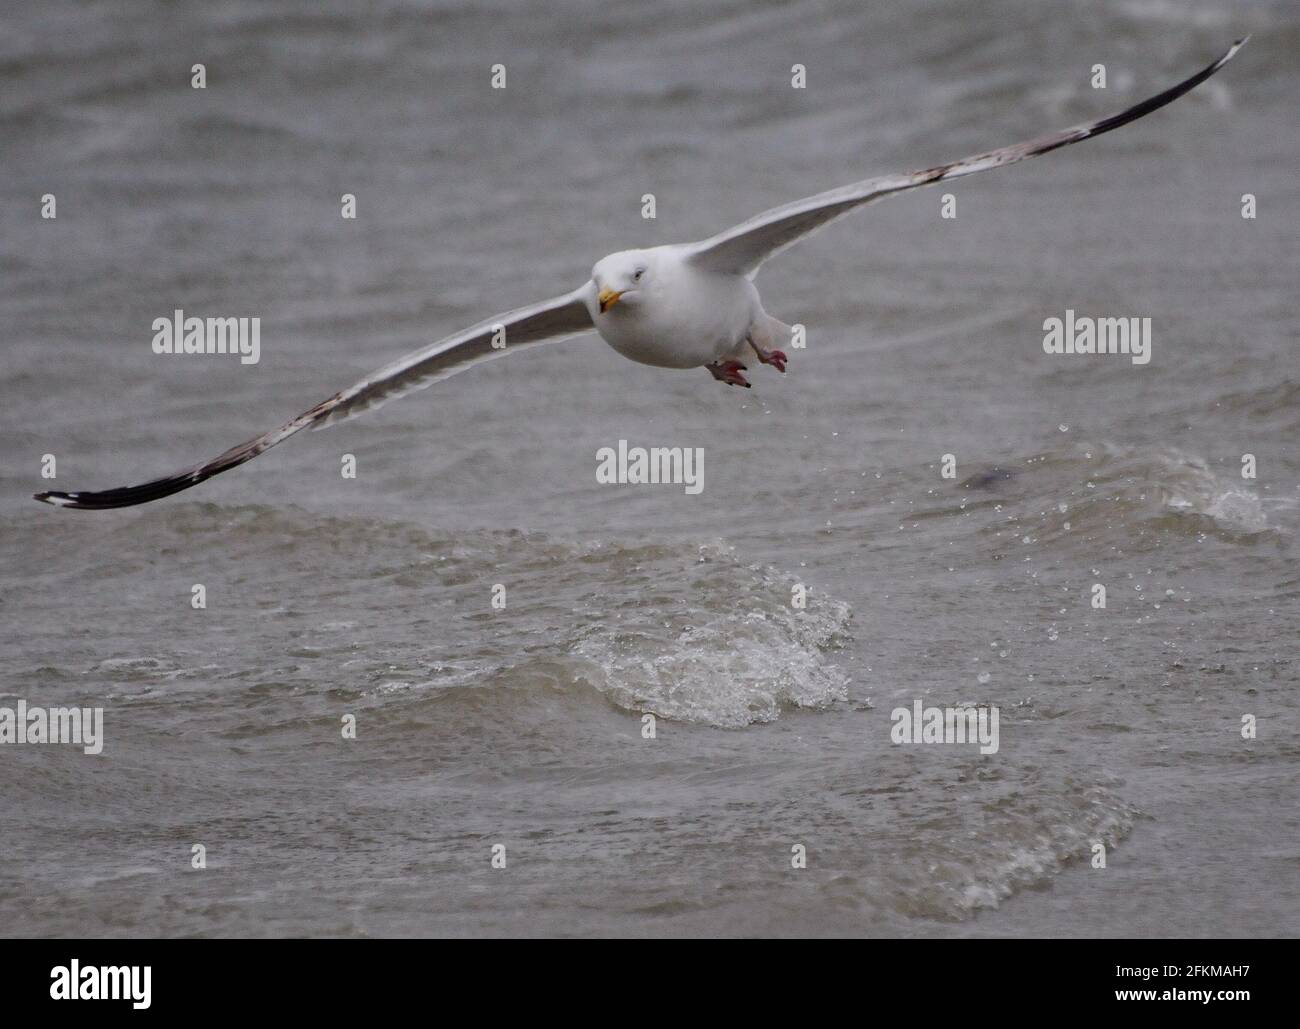 Close Up Of A Flying Silver Gull At The North Sea Coast In Borkum East Frisia Germany On An Overcast Spring Day Stock Photo